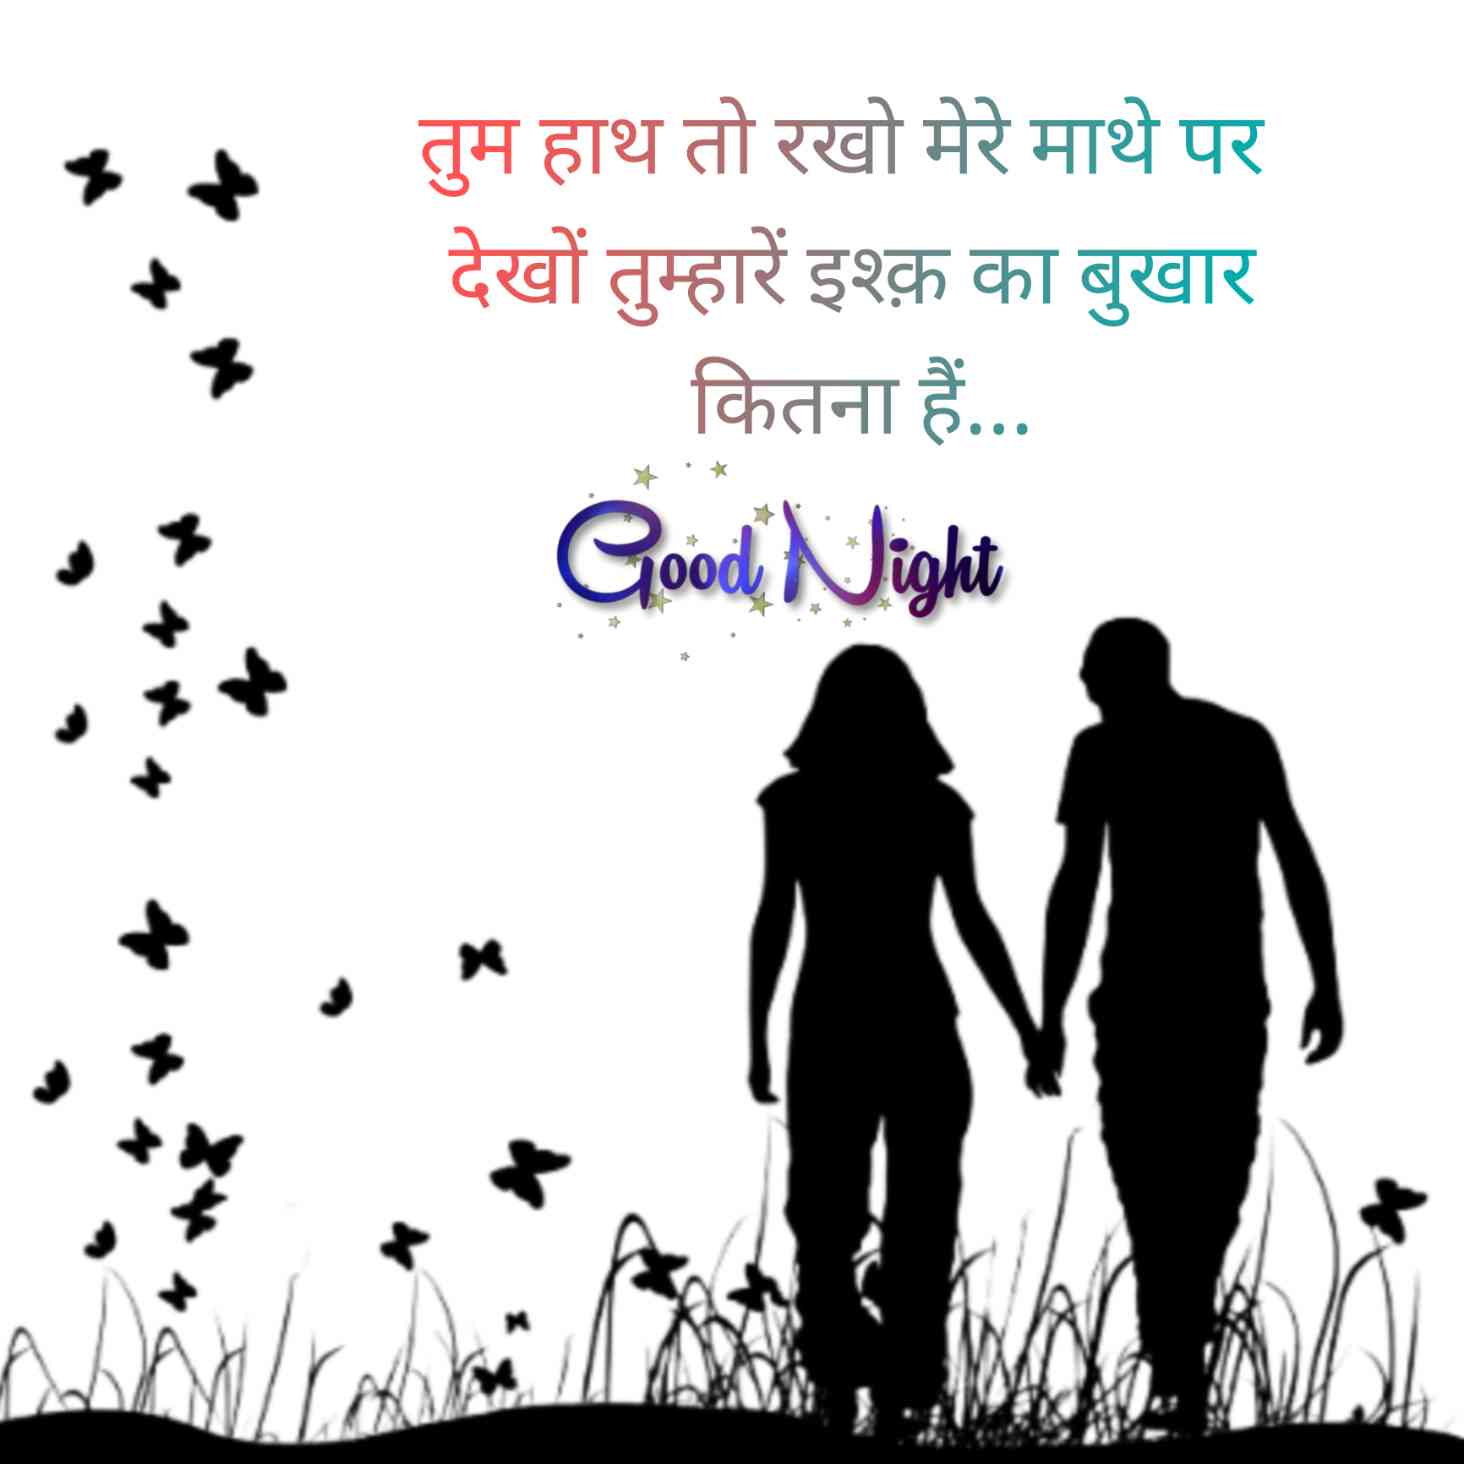 Good night Love quotes in Hindi for couple